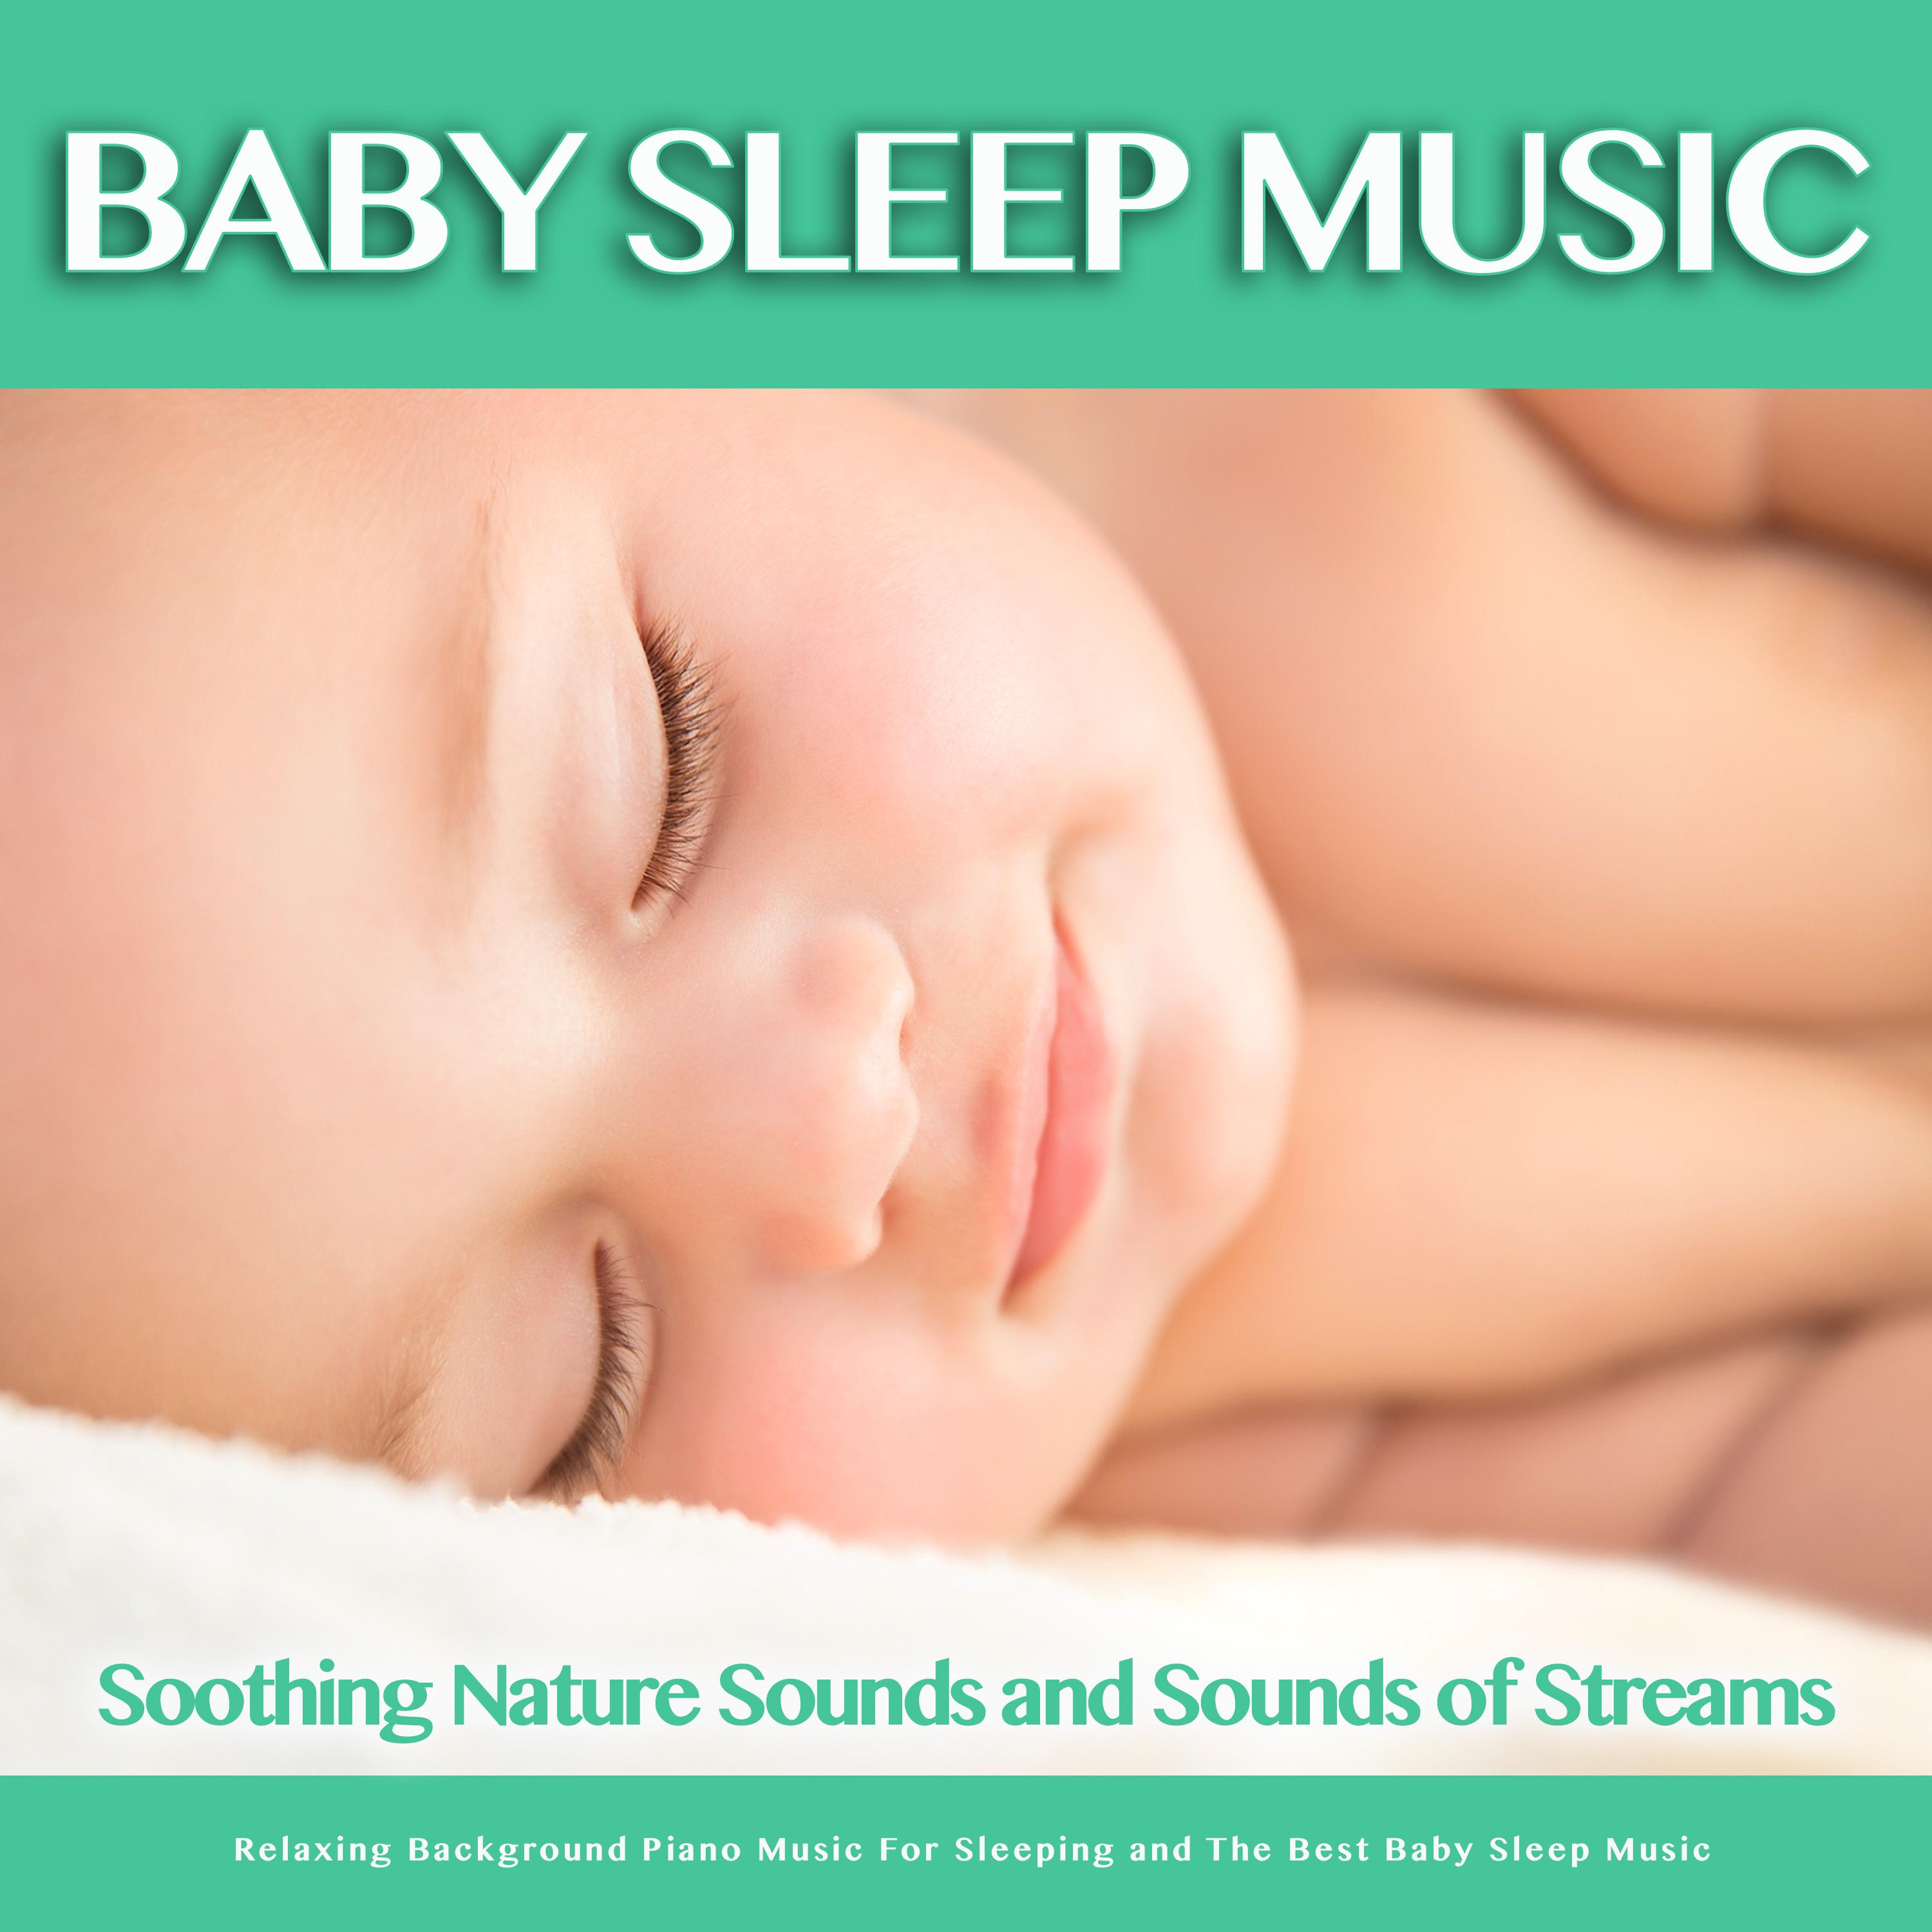 Baby Sleep Music: Soothing Nature Sounds and Sounds of Streams, Relaxing Background Piano Music For Sleeping and The Best Baby Sleep Music